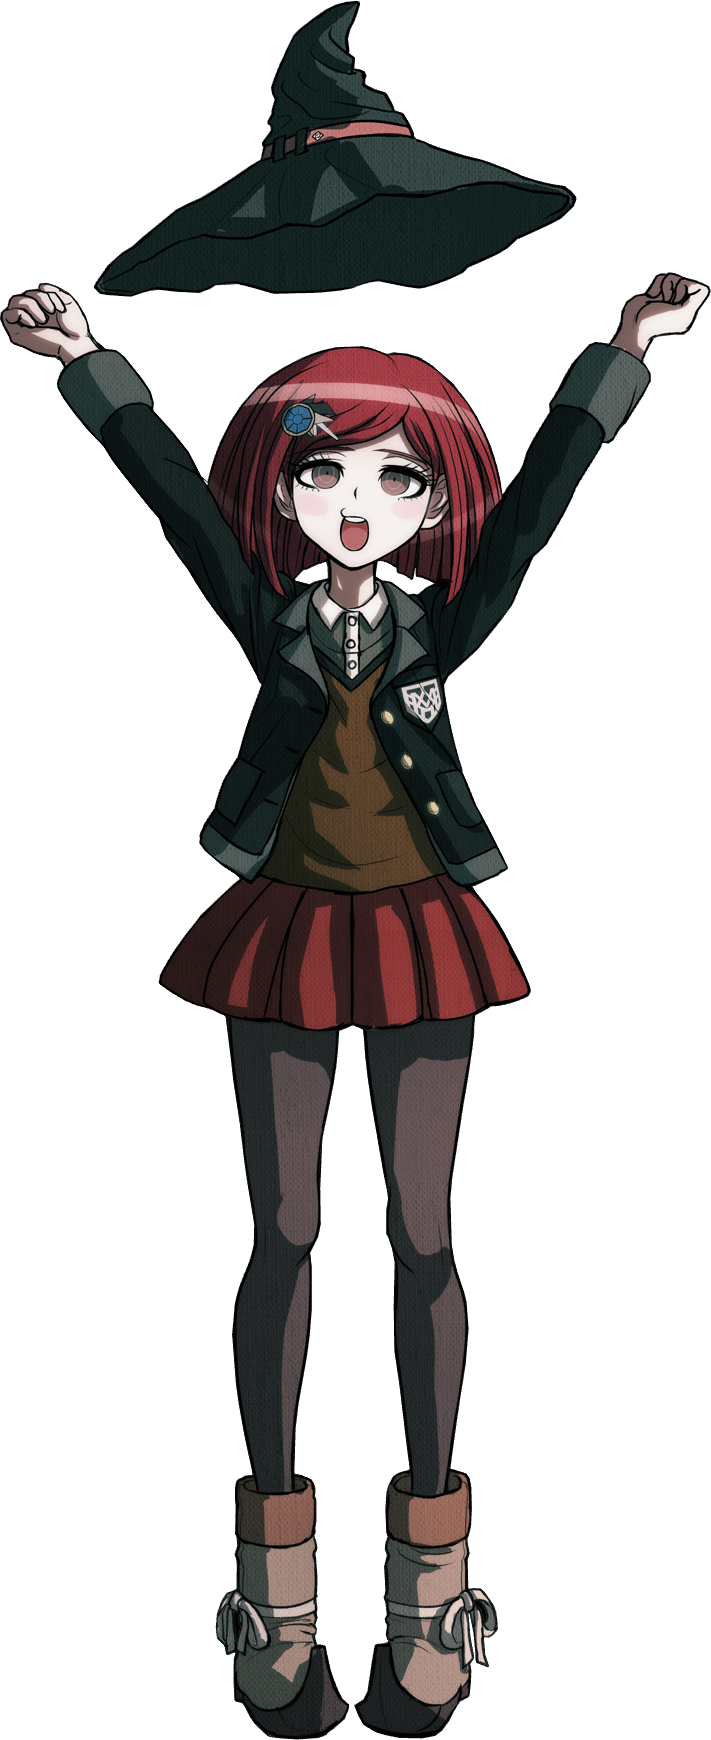 I&#039;m Himiko Yumeno! The Ultimate Mage! But I&#039;m officially called.. The Ultimate Magician. Minecraft Skin